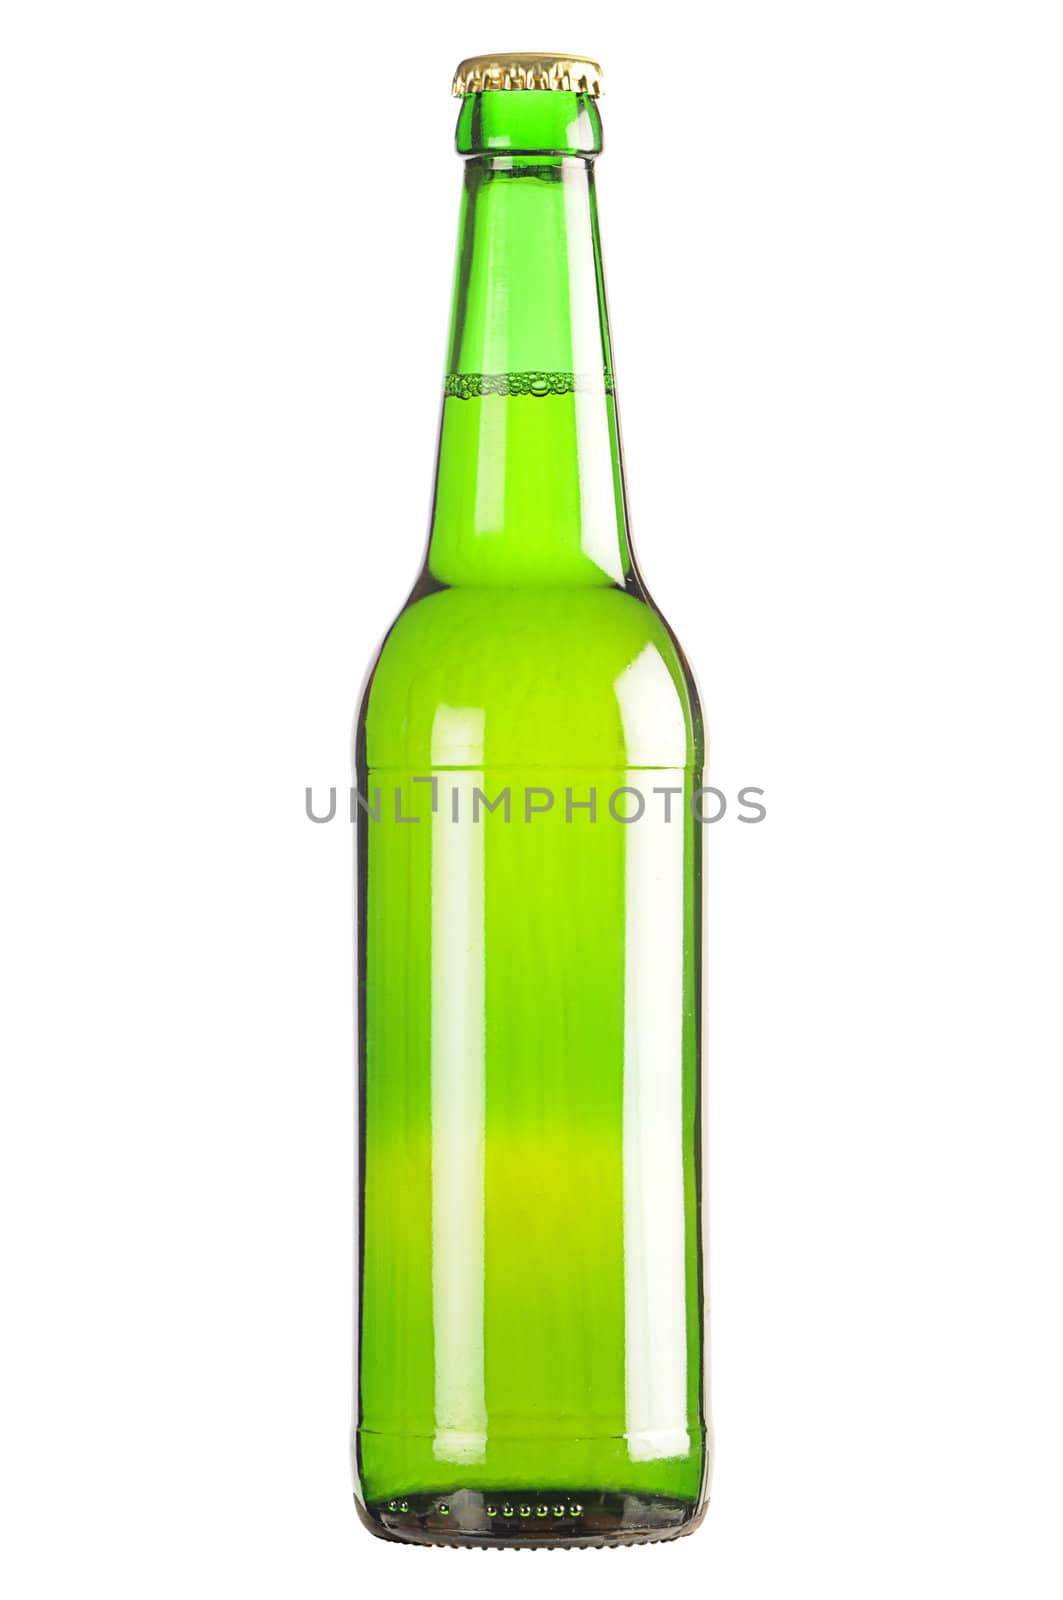 Lager beer bottle gloss with clipping path